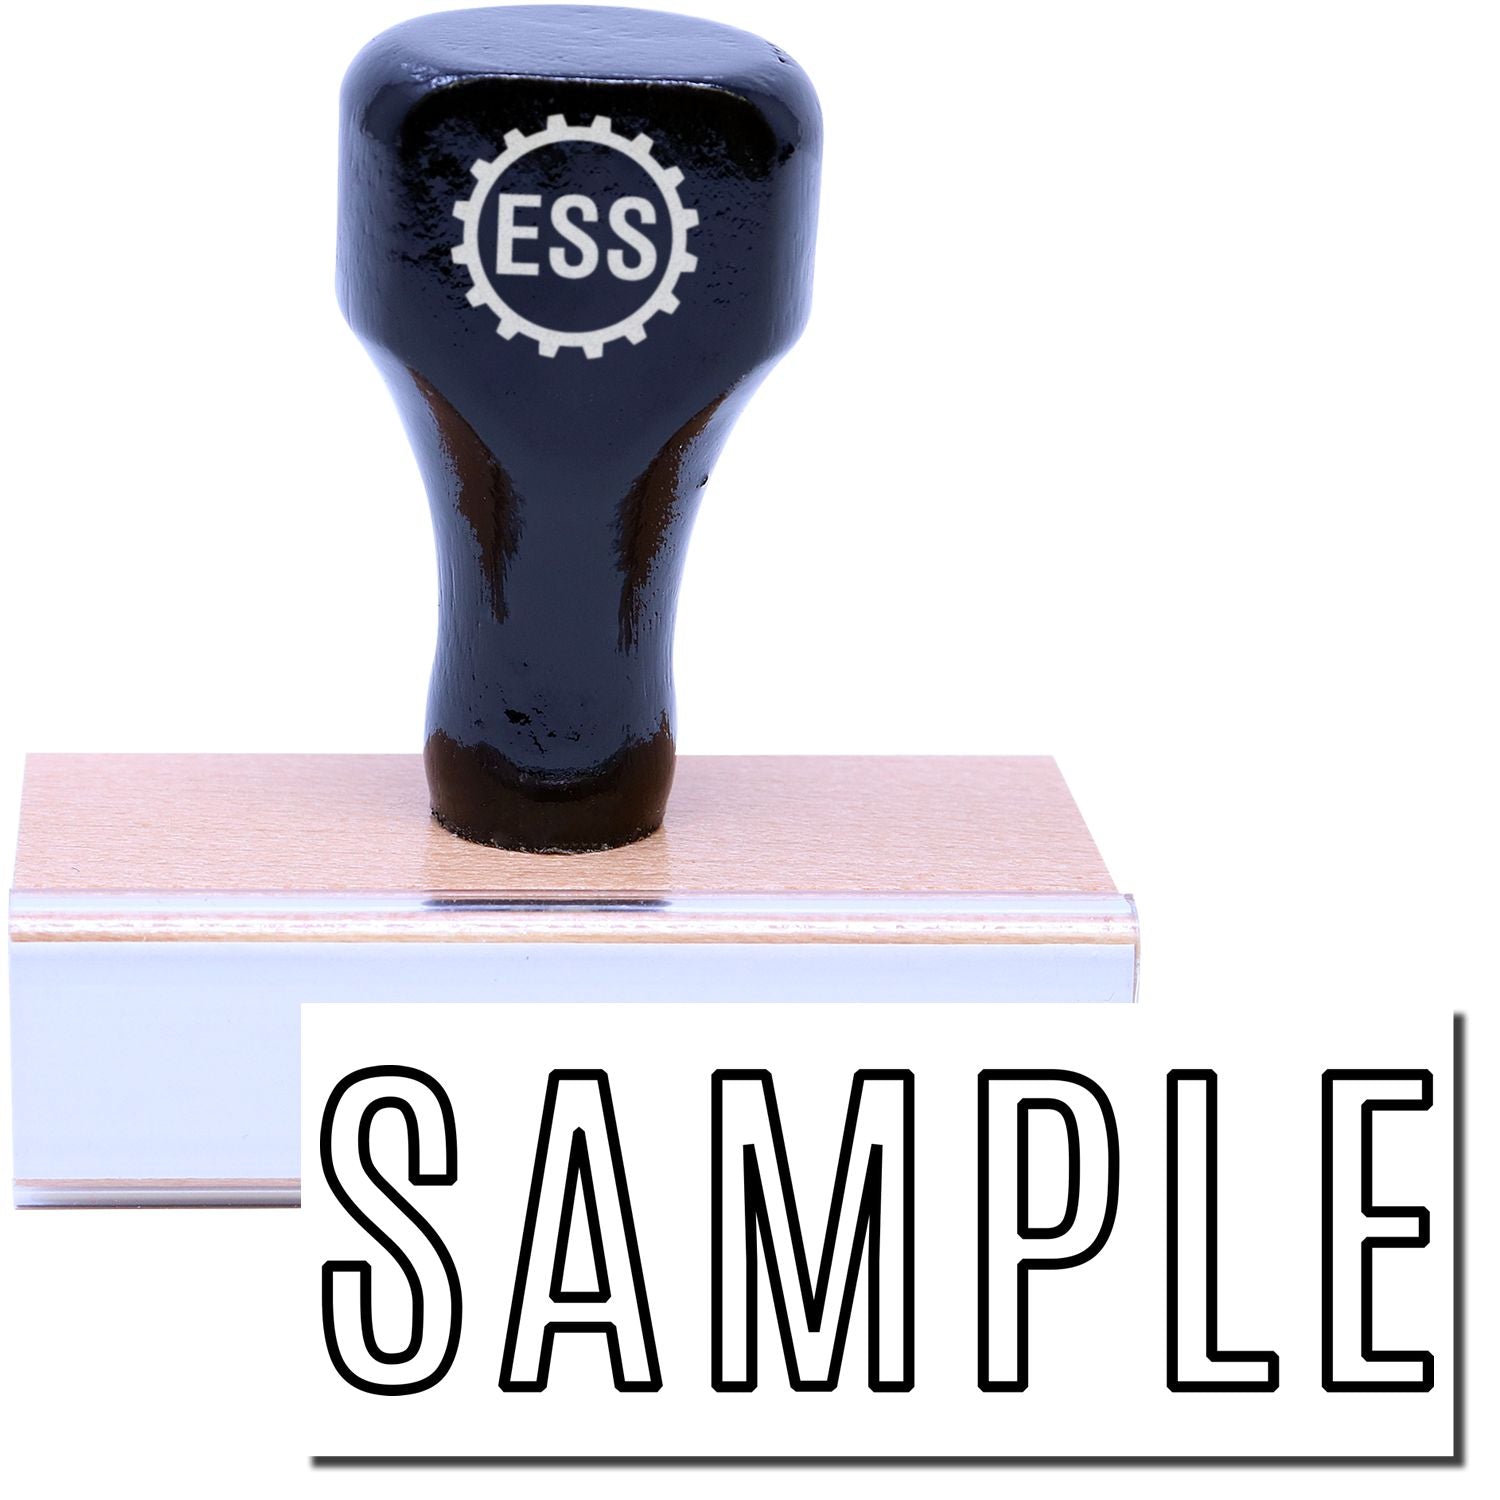 A stock office rubber stamp with a stamped image showing how the text "SAMPLE" in an outline font is displayed after stamping.